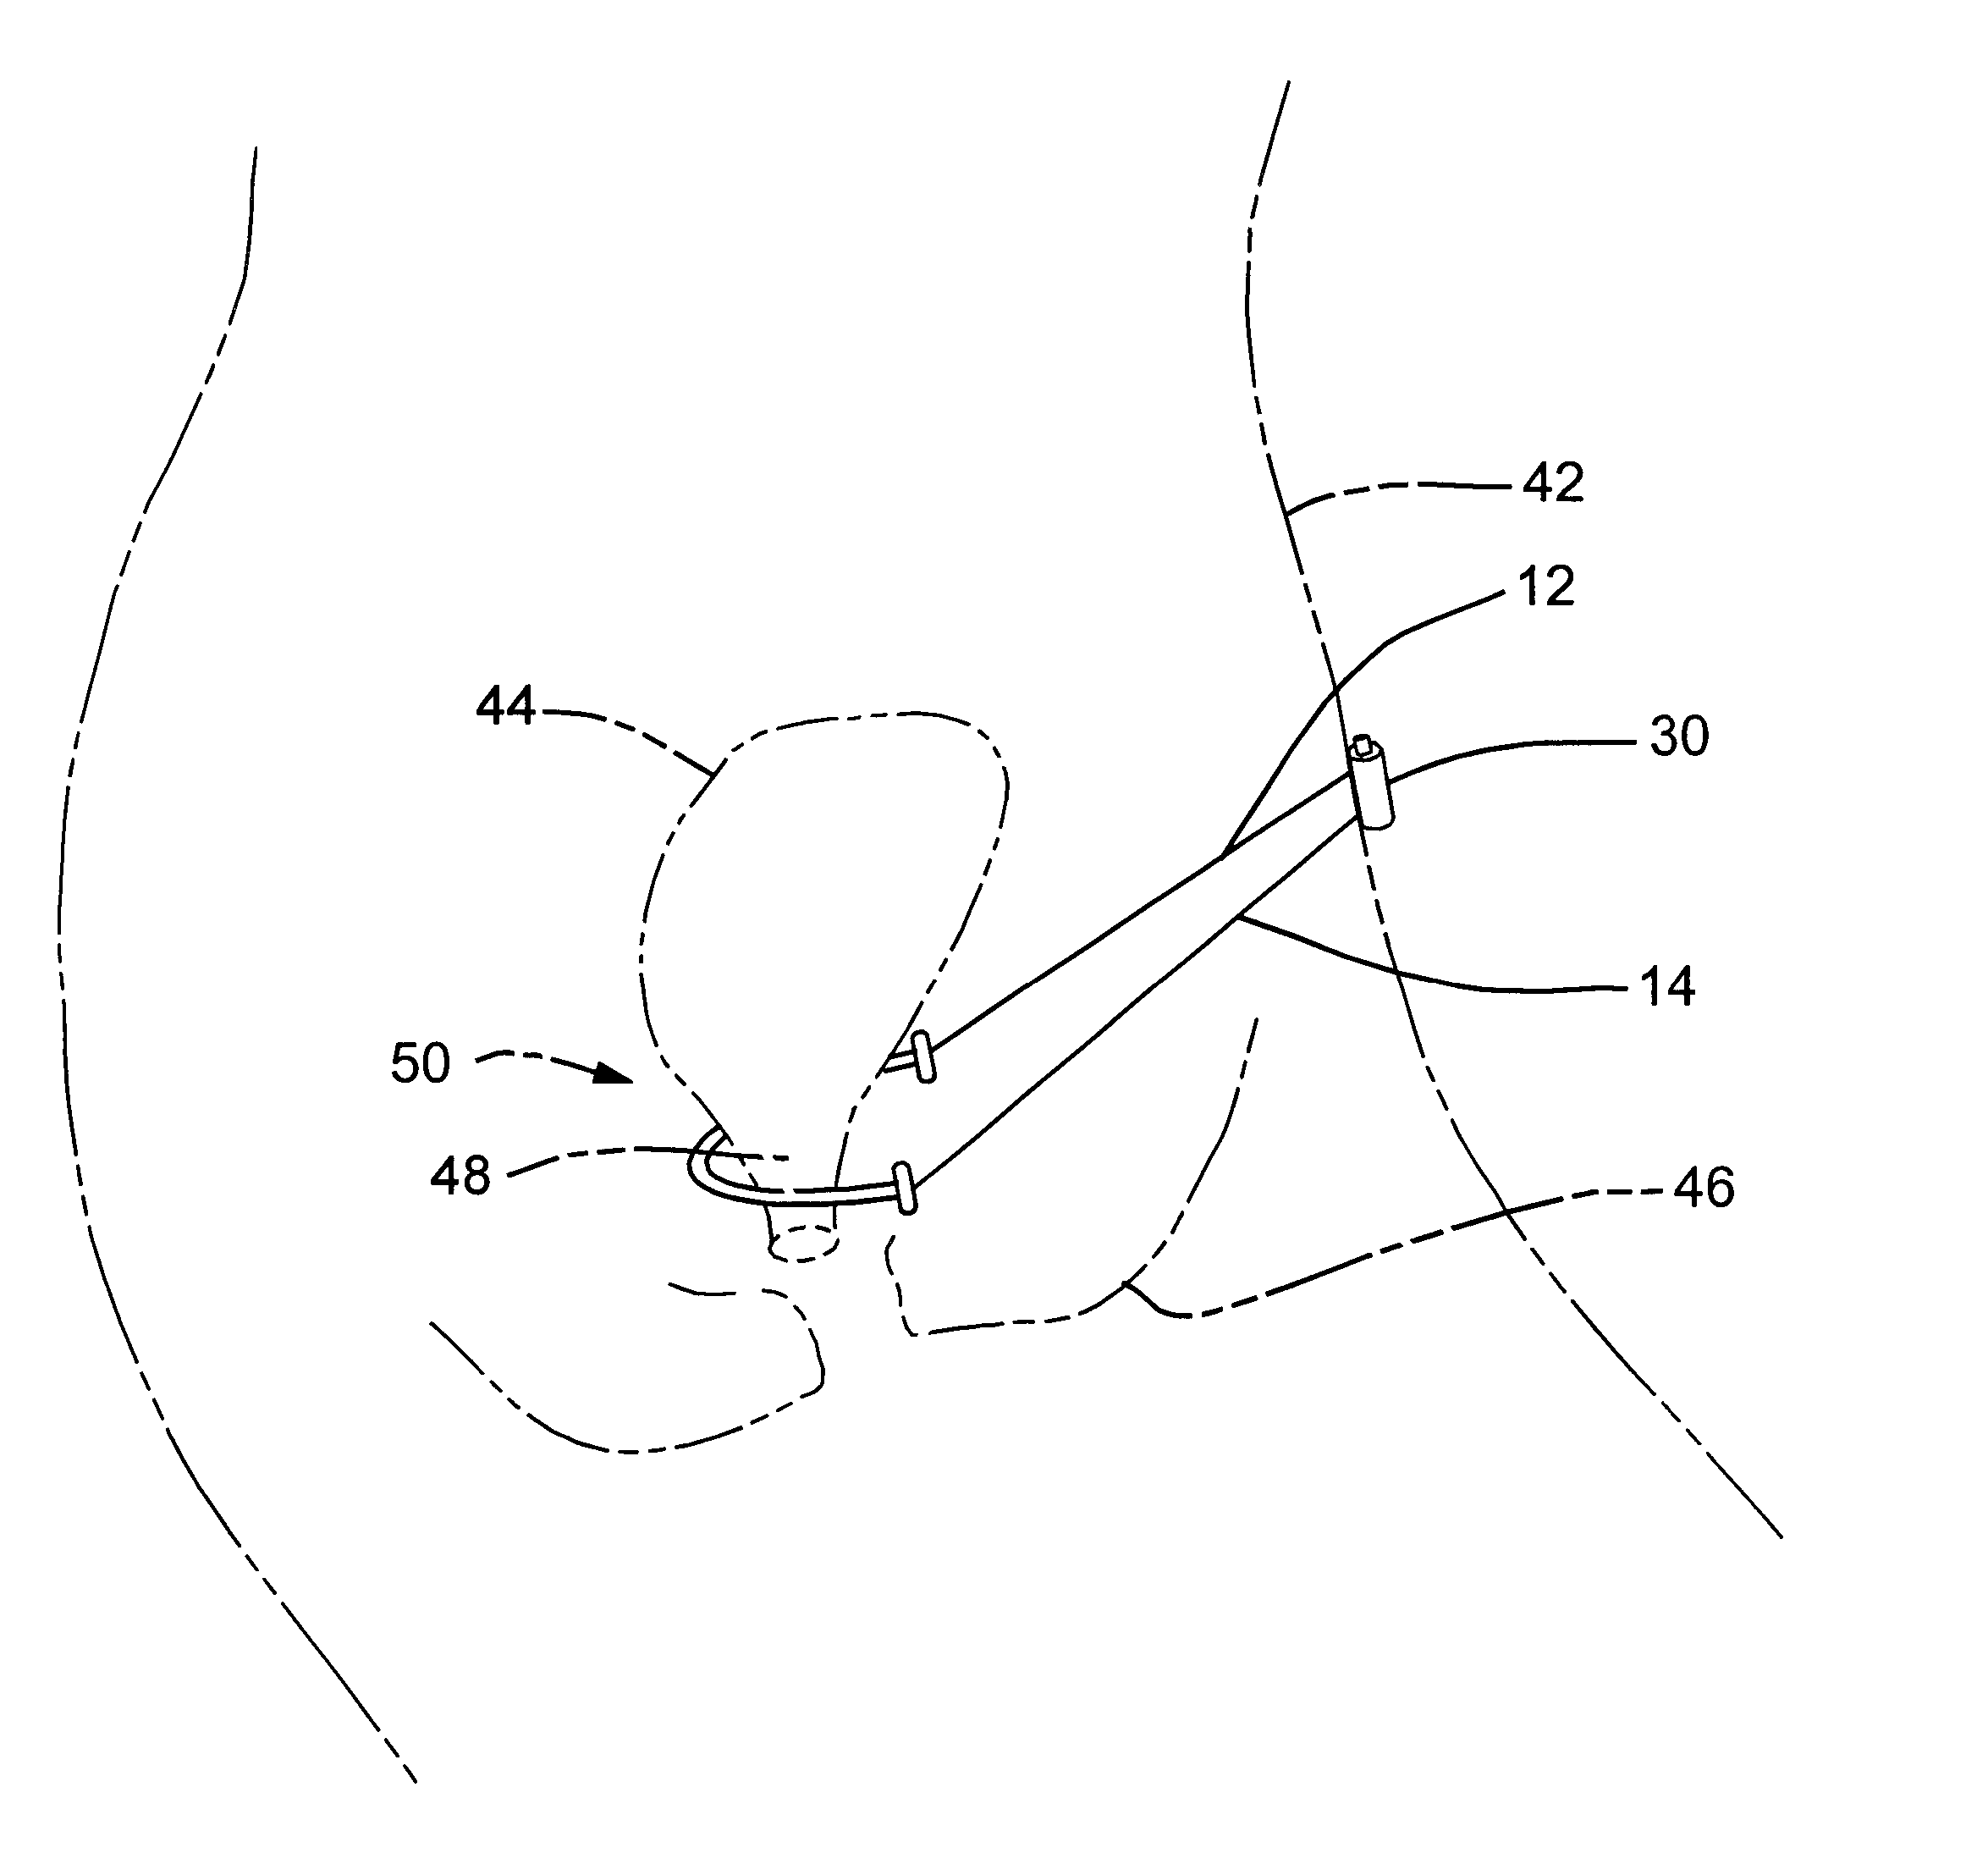 Absorbable pubovaginal sling system and method